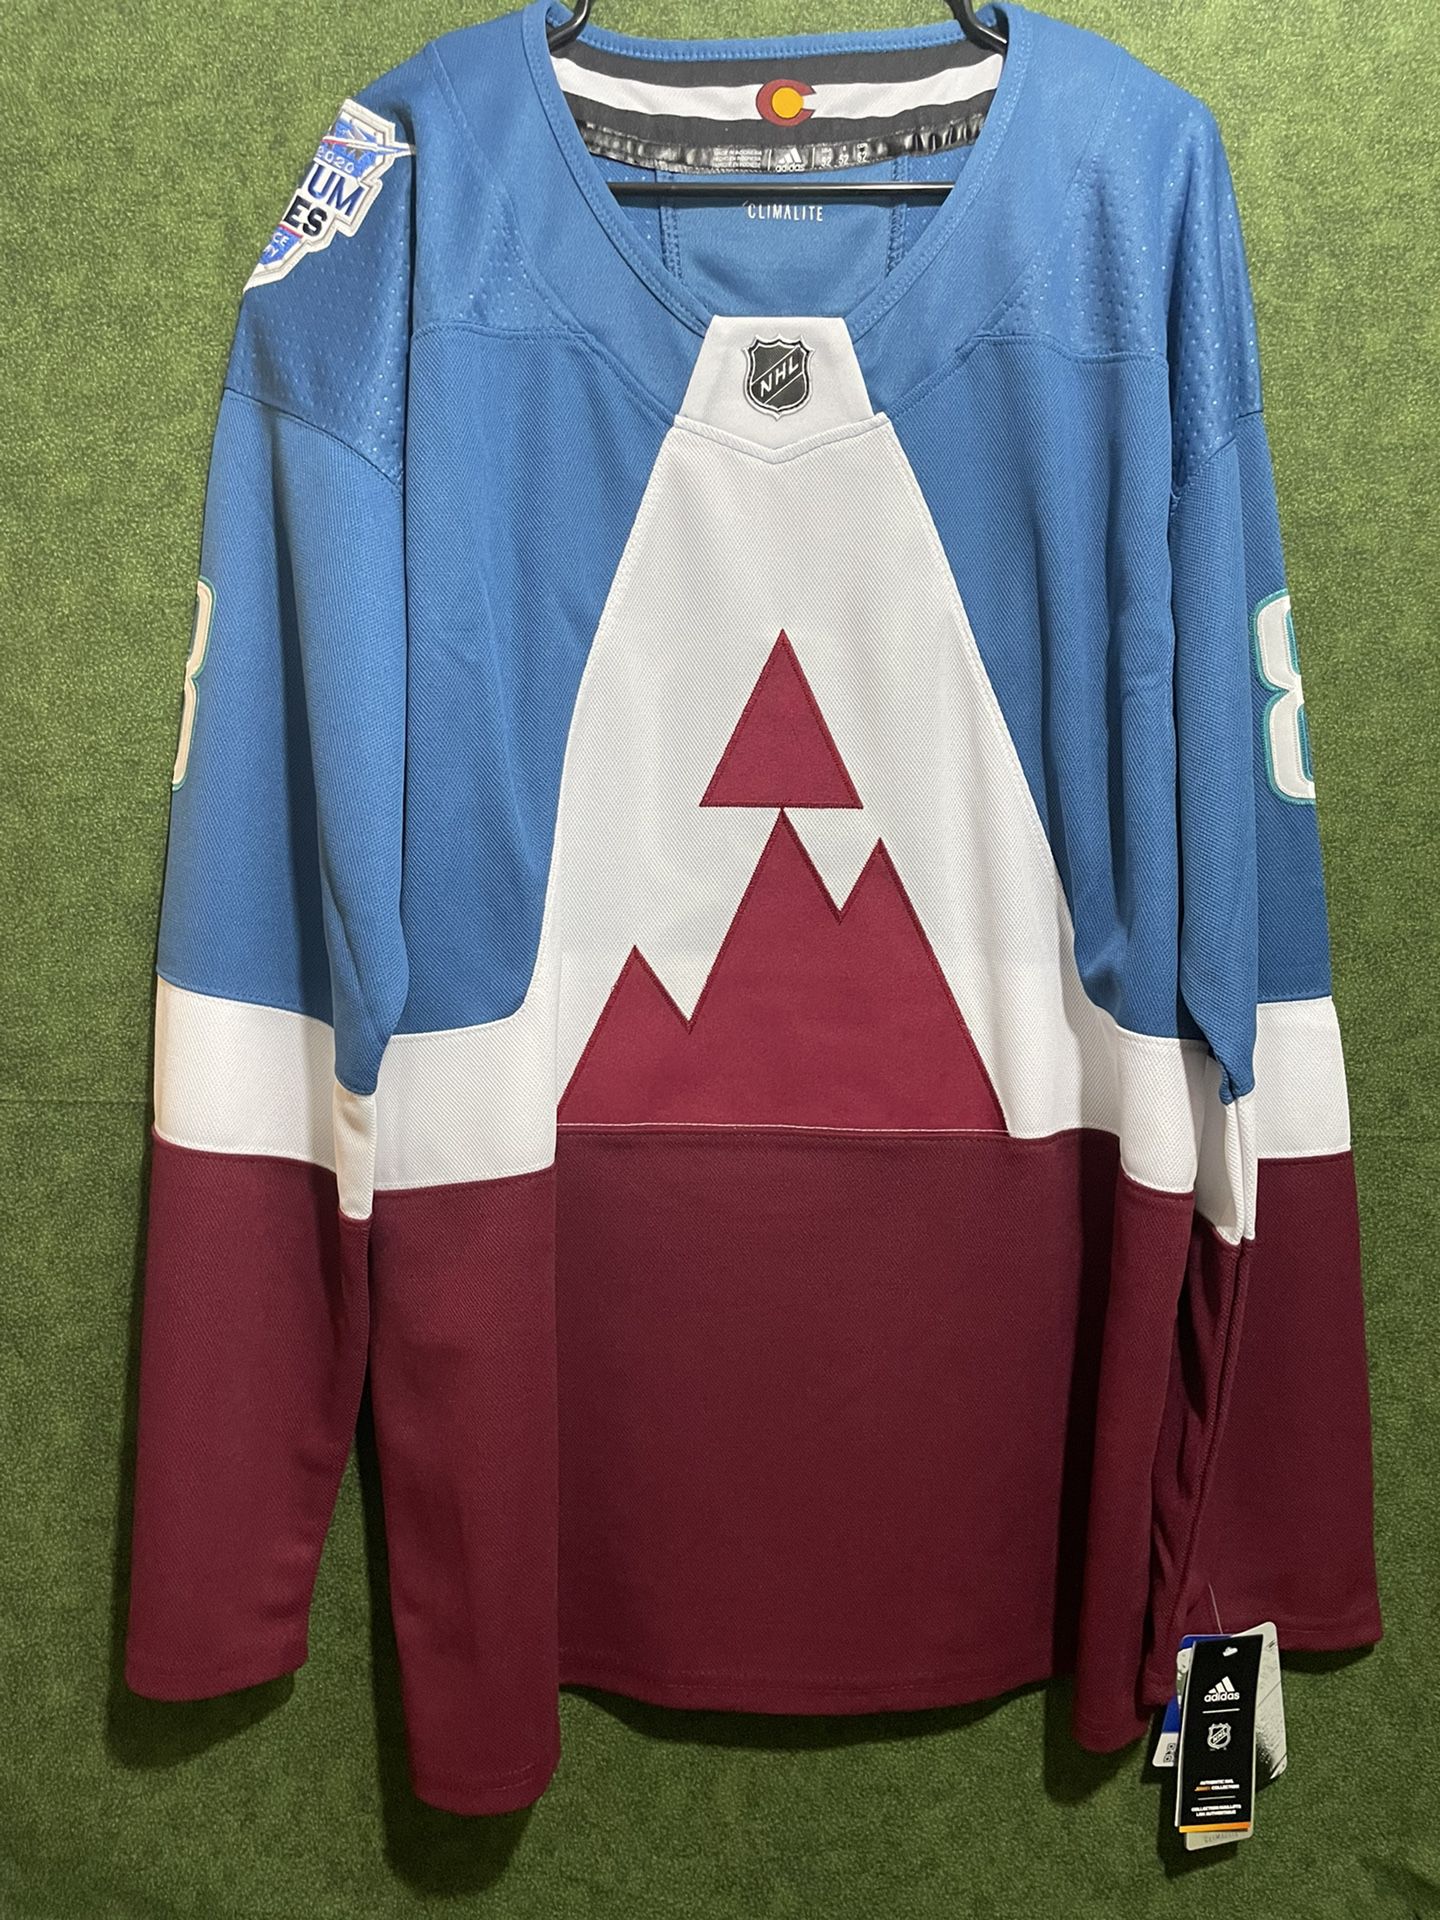 CALE MAKAR COLORADO AVALANCHE ADIDAS JERSEY BRAND NEW WITH TAGS SIZE LARGE 